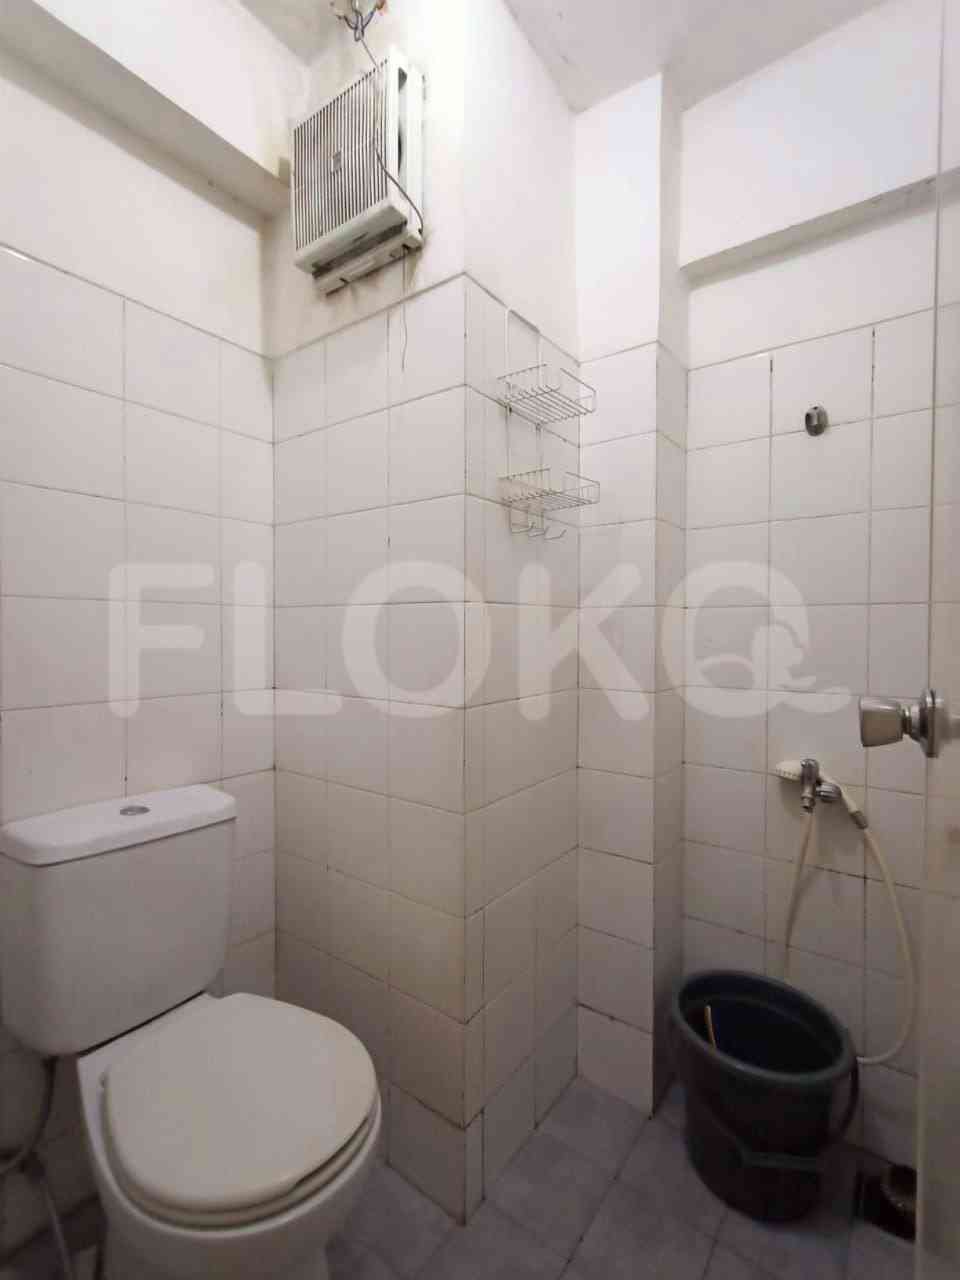 2 Bedroom on 15th Floor for Rent in Sentra Timur Residence - fca10f 5